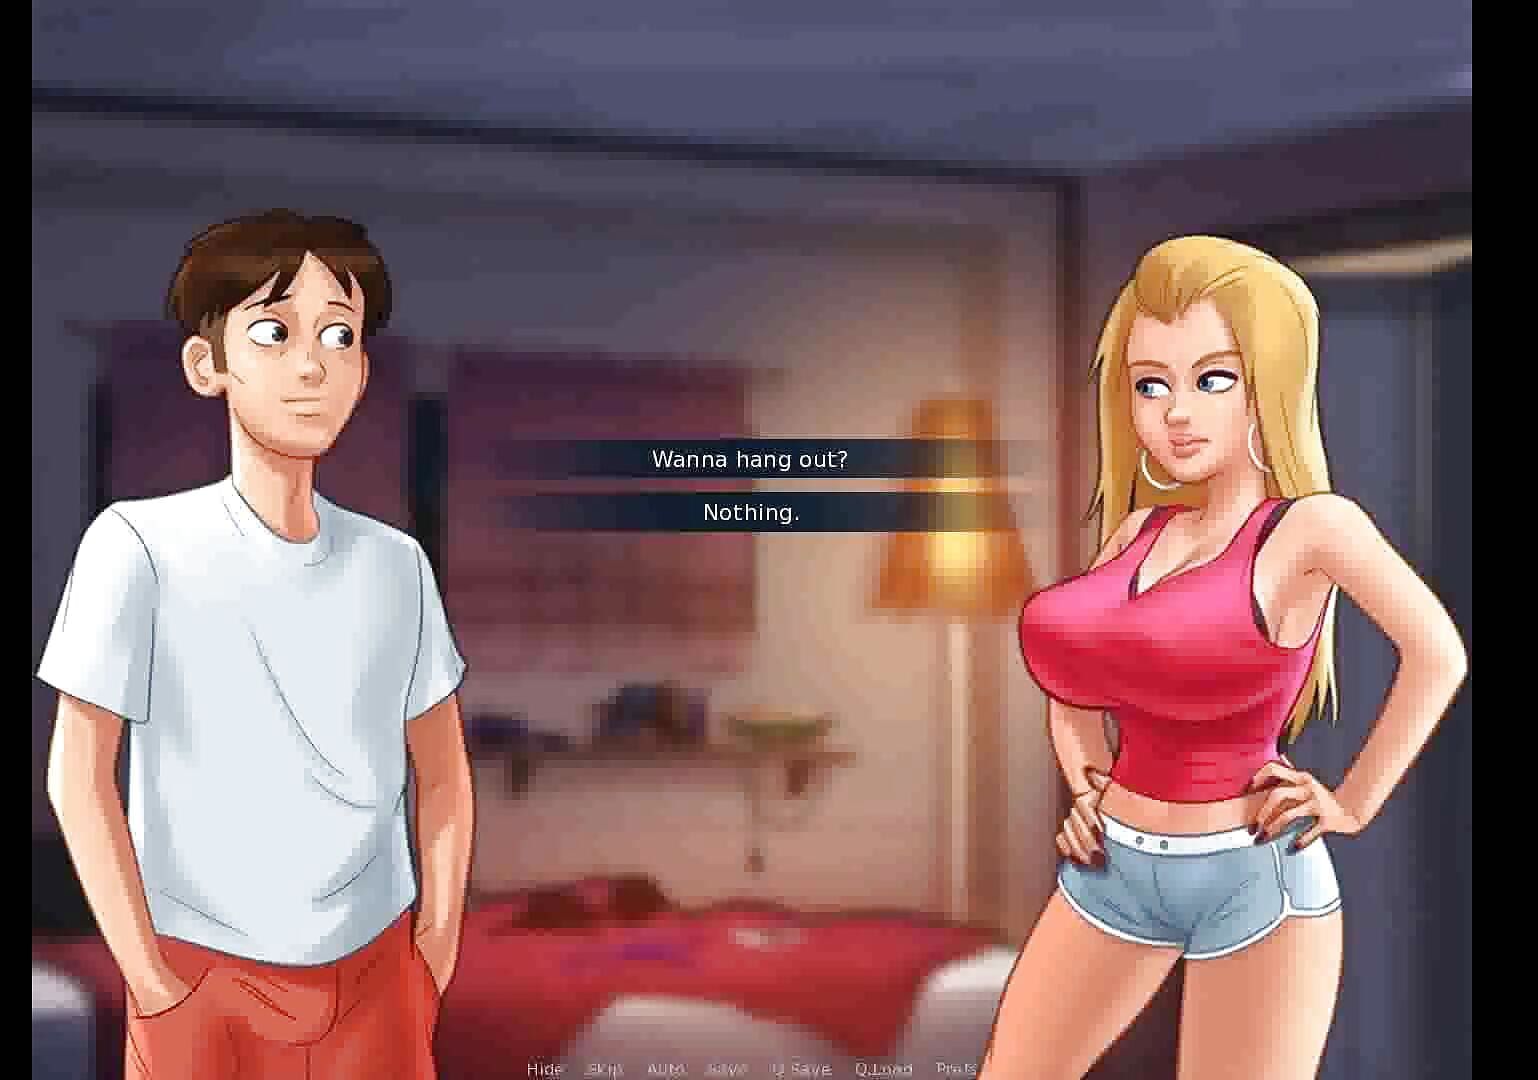 College Young Teen Girls: Summertime saga: college guy and his adventures ep 60 – Dirty GamesxXx – porn studio: Dirty GamesXxX